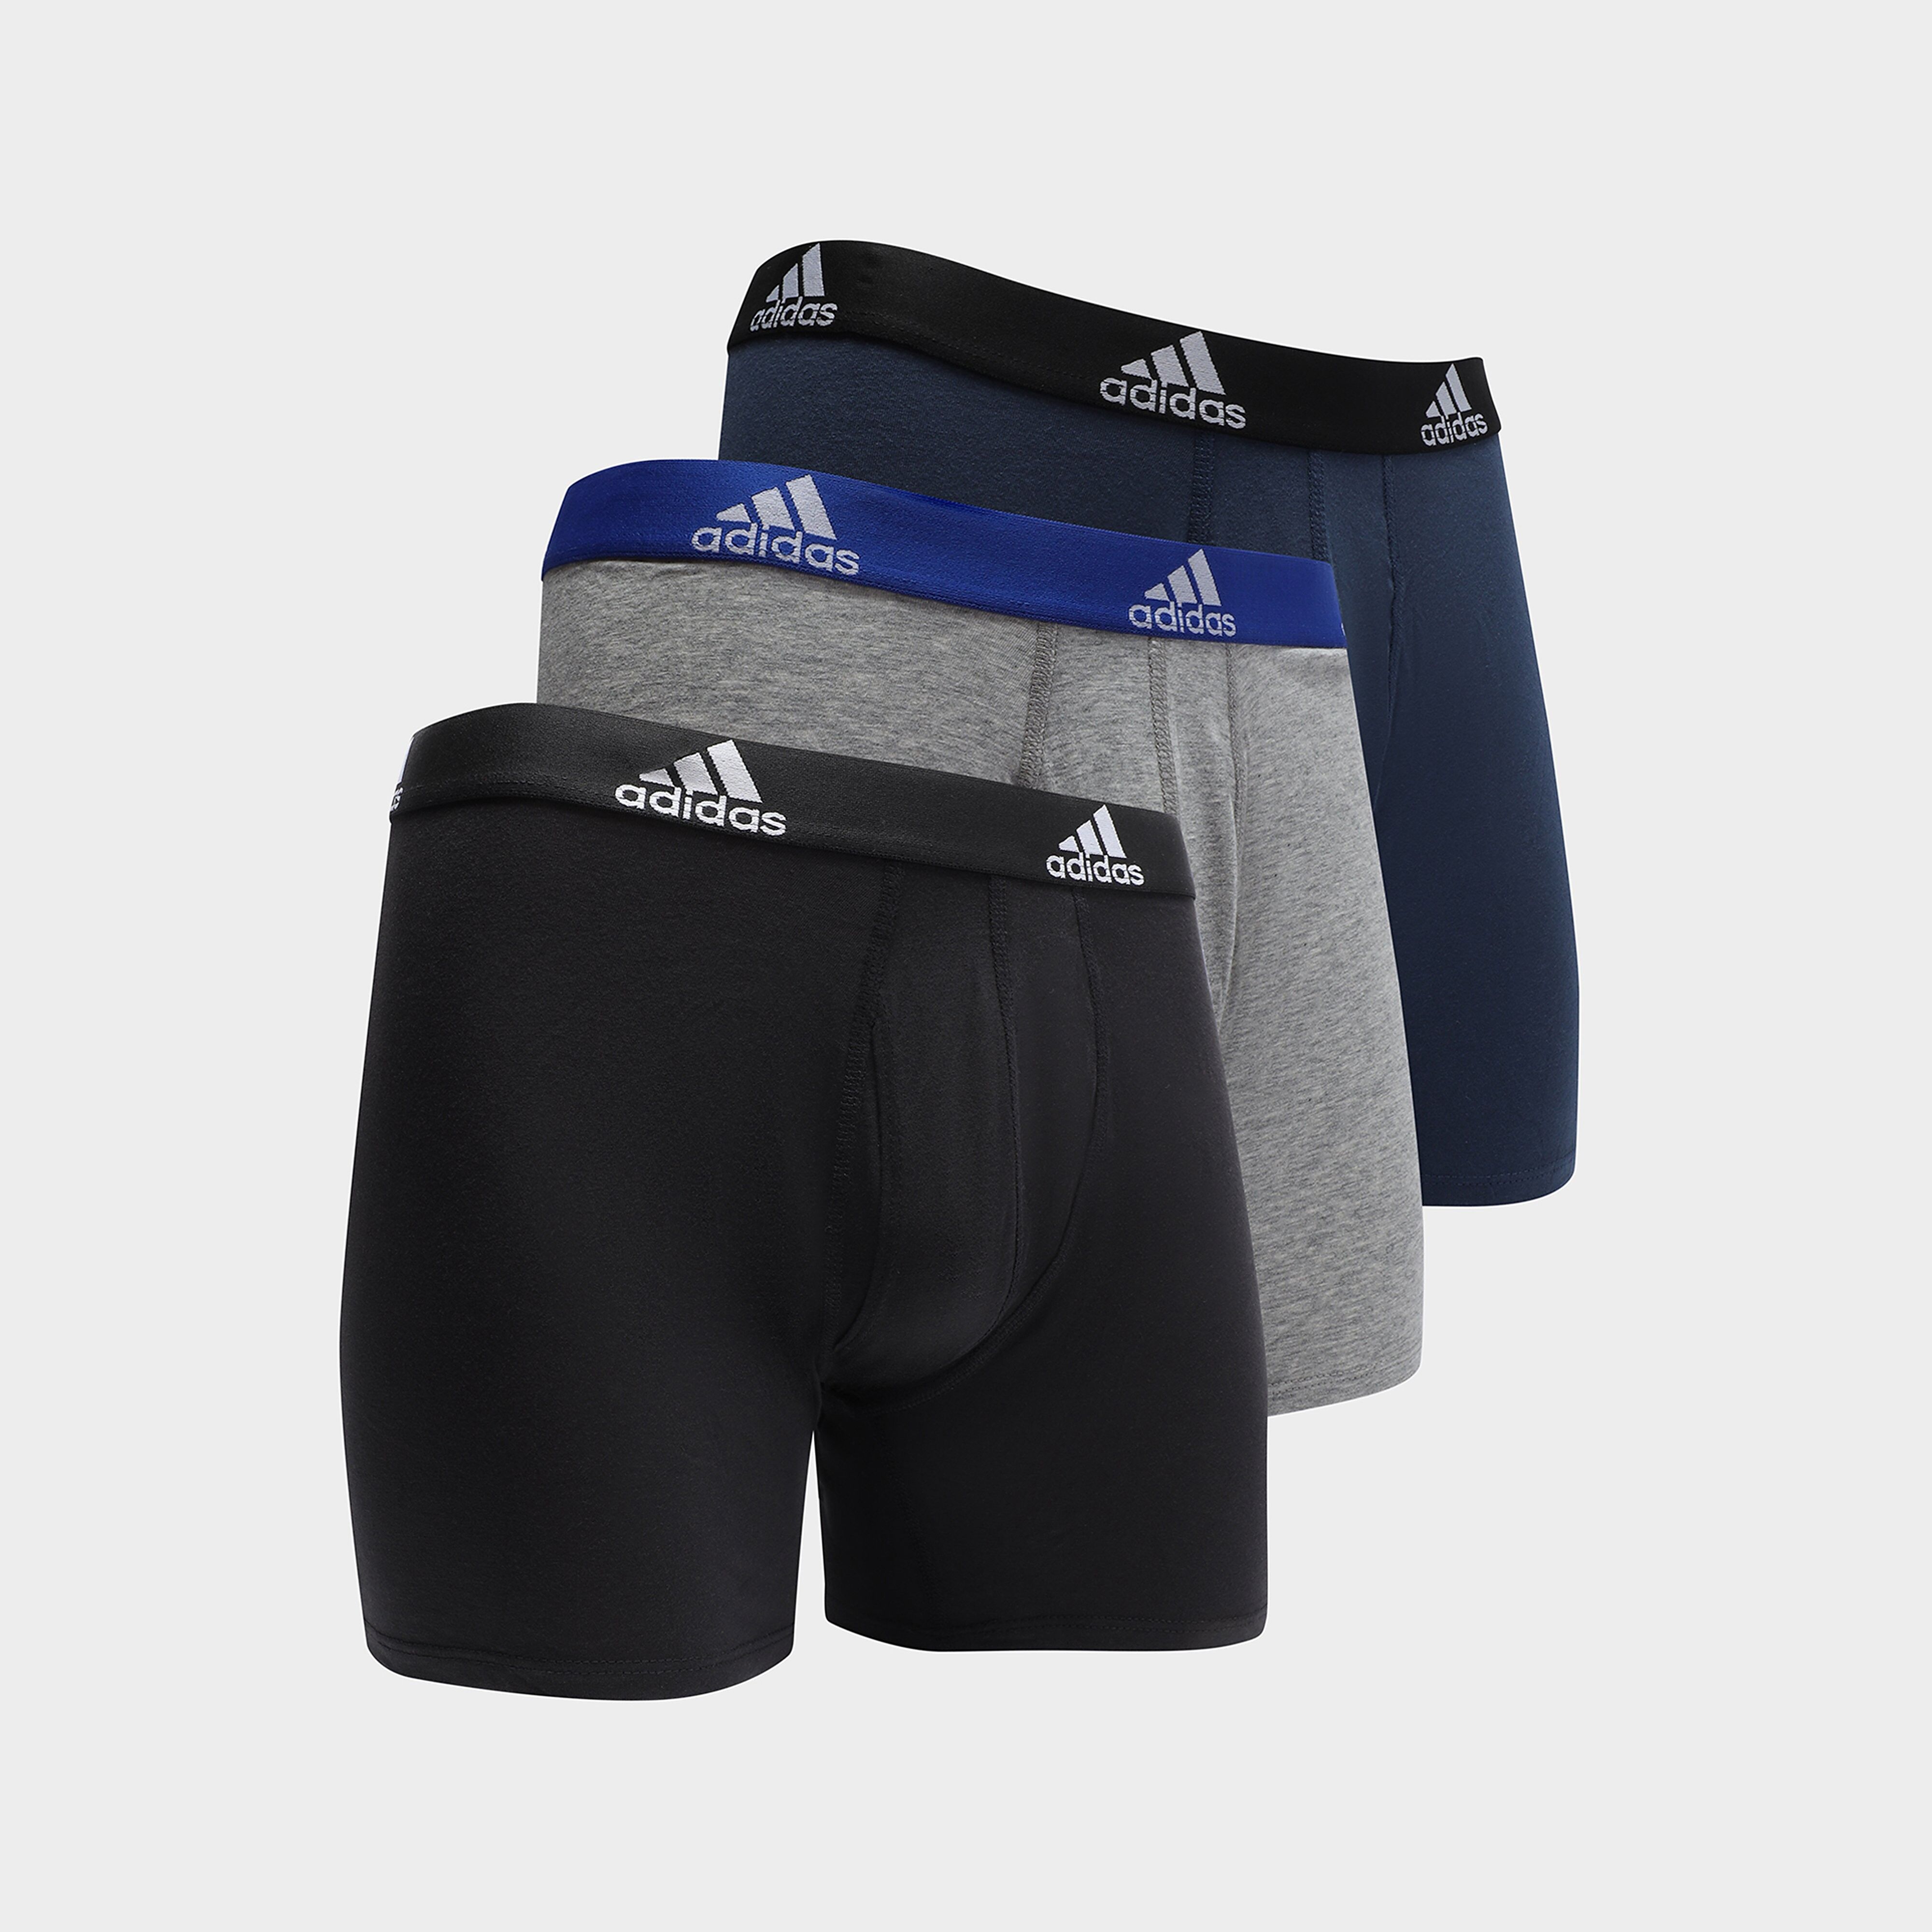 adidas Badge of Sport 3 Pack Trunks - Multi - Mens  size: XL